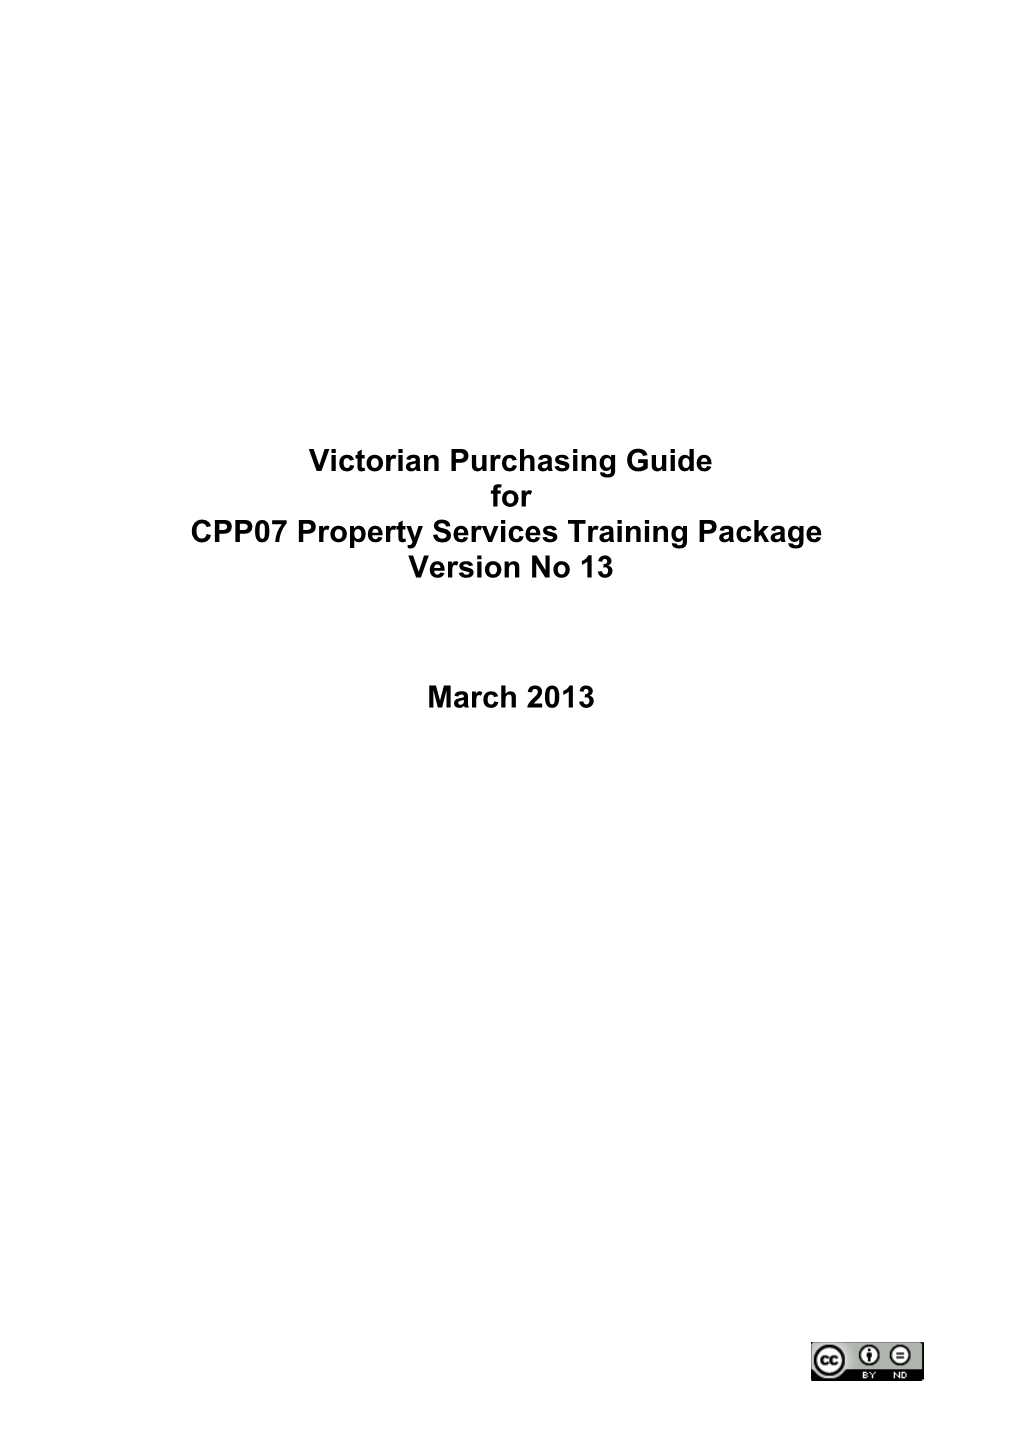 Victorian Purchasing Guide for CPP07 Property Services Version 13